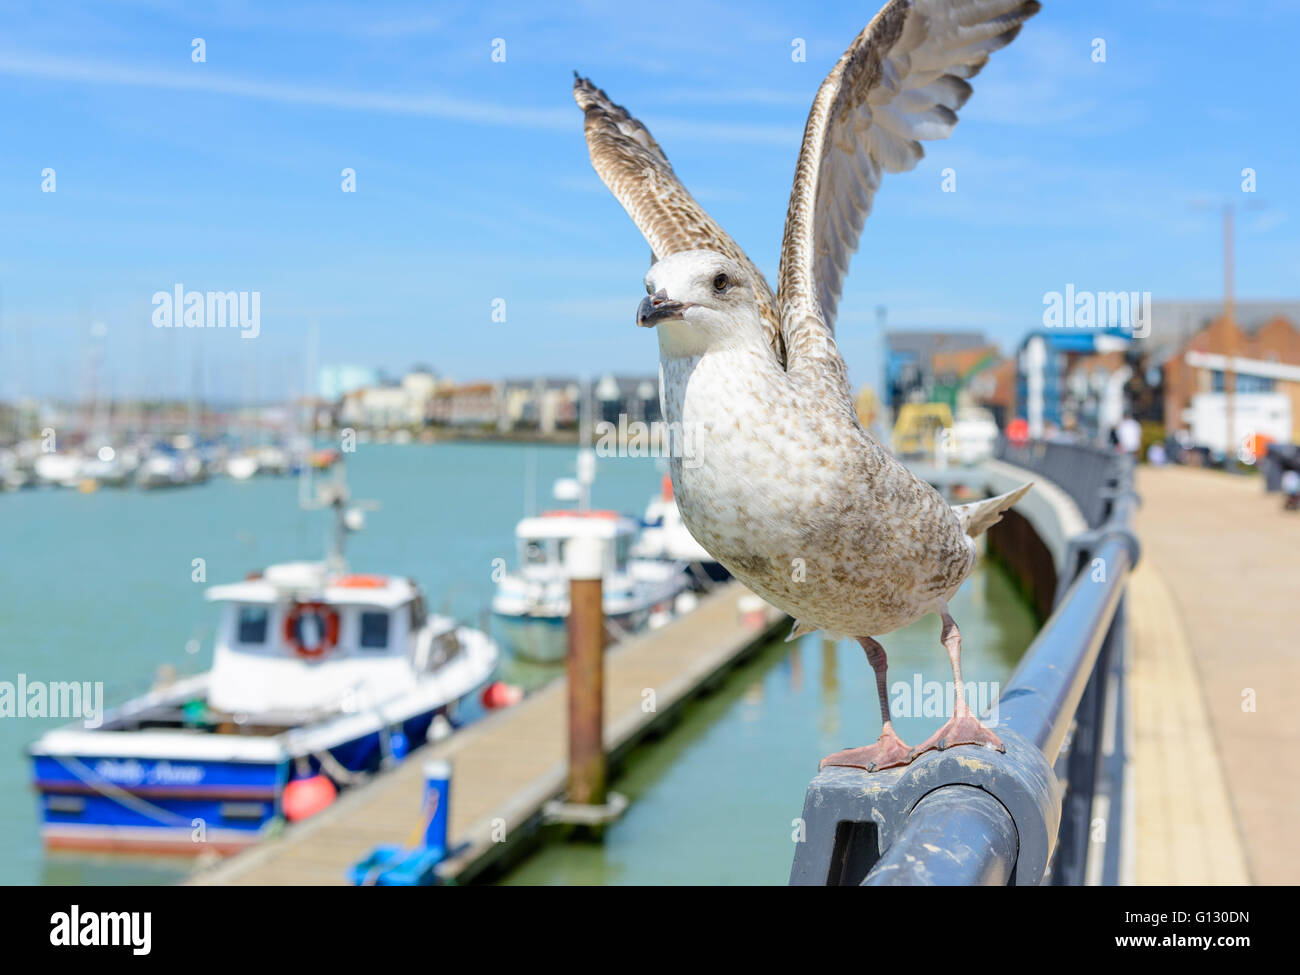 Juvenile Herring Gull (Larus Argentatus) taking off by the river in Spring in Littlehampton, West Sussex, England, UK. Stock Photo